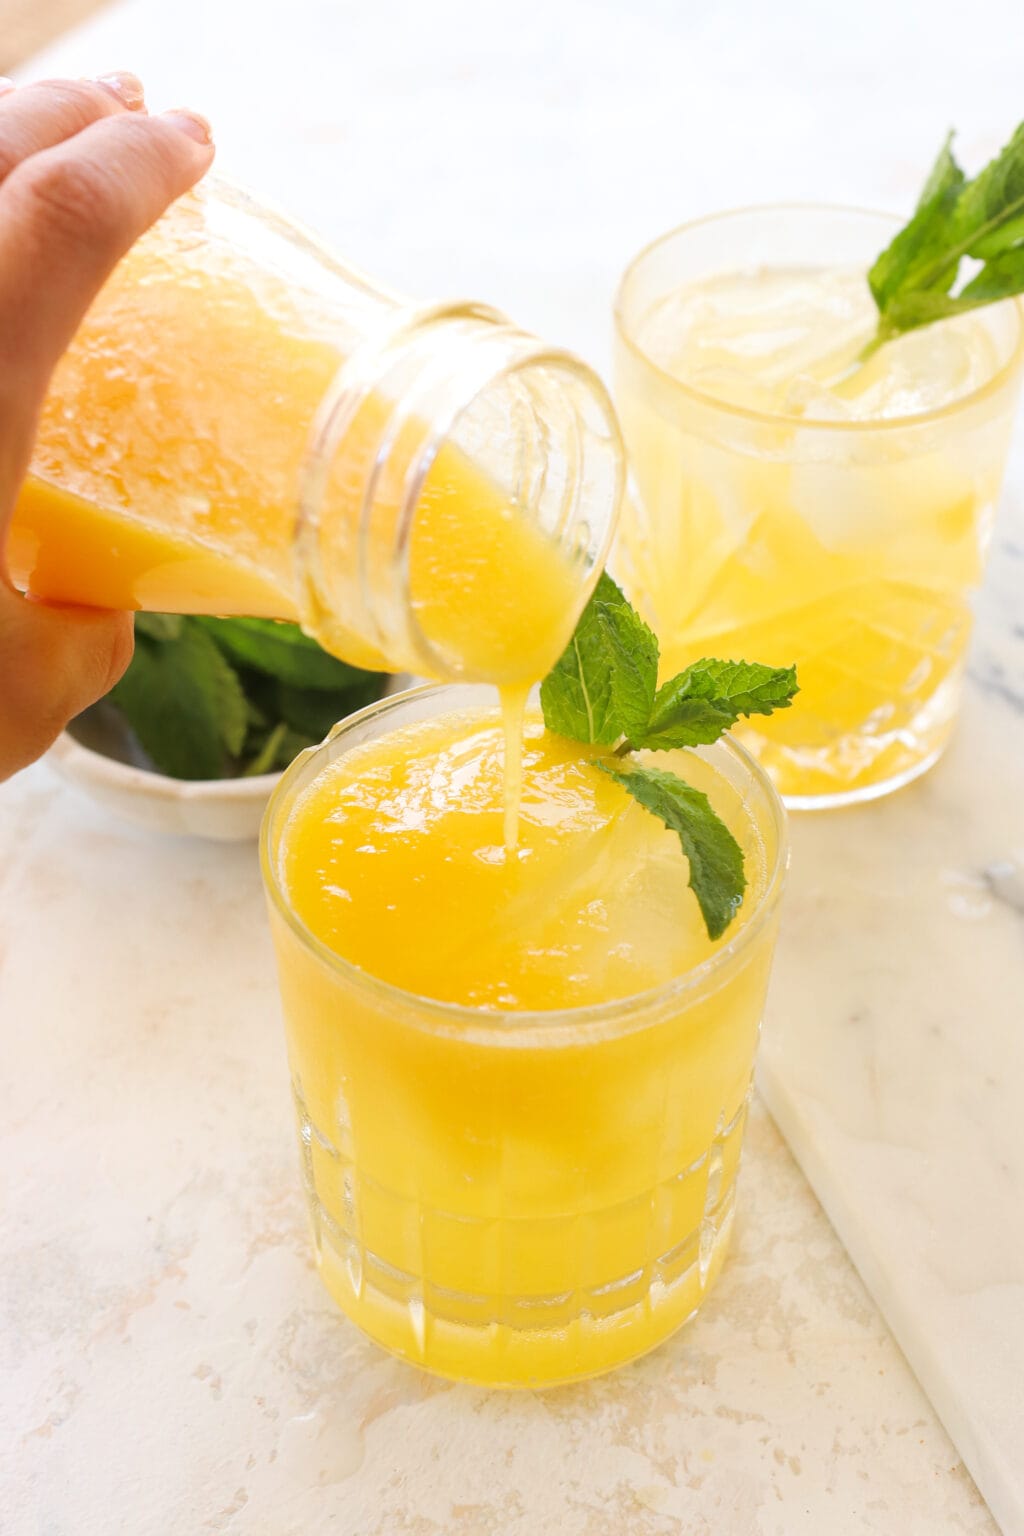 A hand holding a bottle over a short clear glass. The bottle is pouring yellowish orange puree into it and there is mint garnishing the glass. In the background is another cup with the same liquid and a bowl of mint.